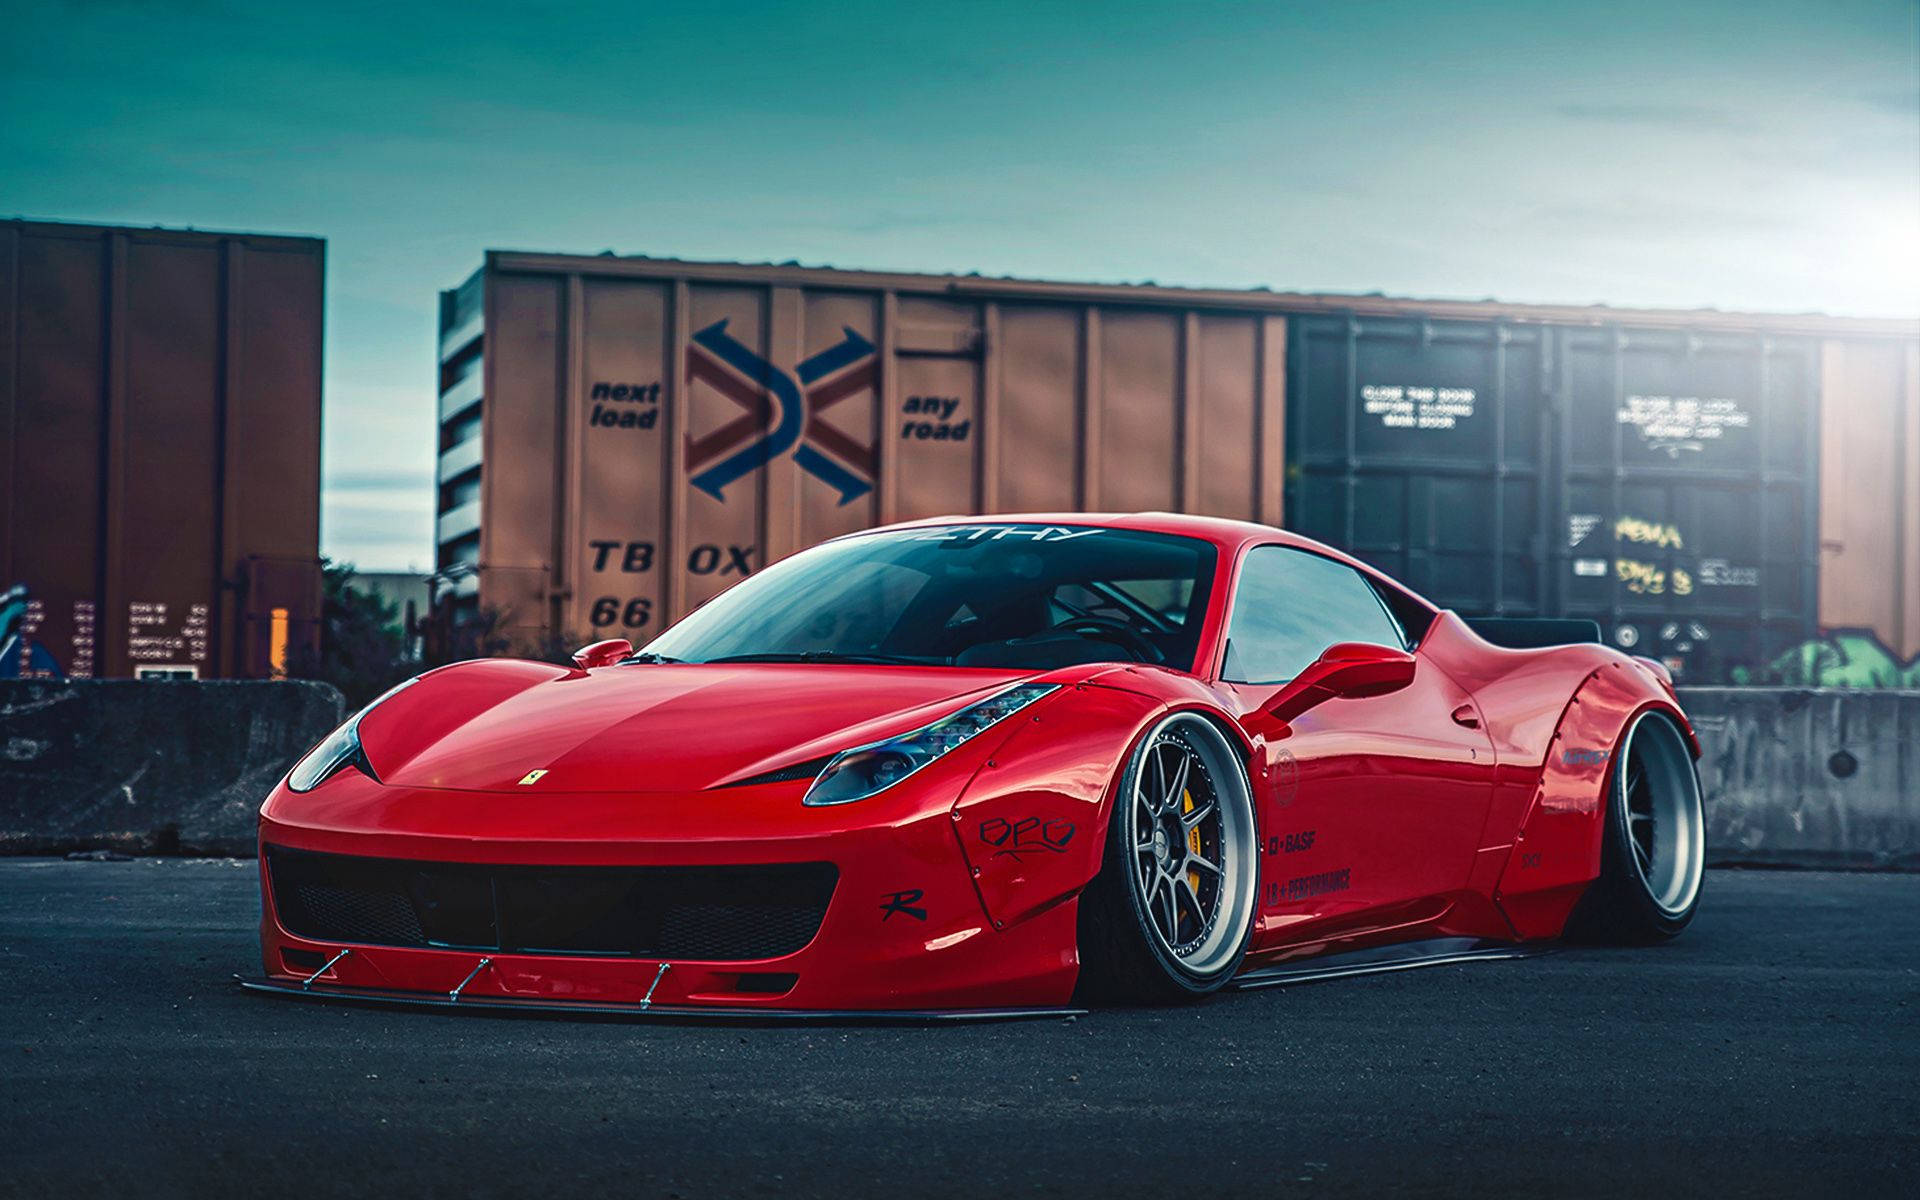 "Take a look at this Ferrari 458 Liberty Walk and admire its power and beauty!" Wallpaper